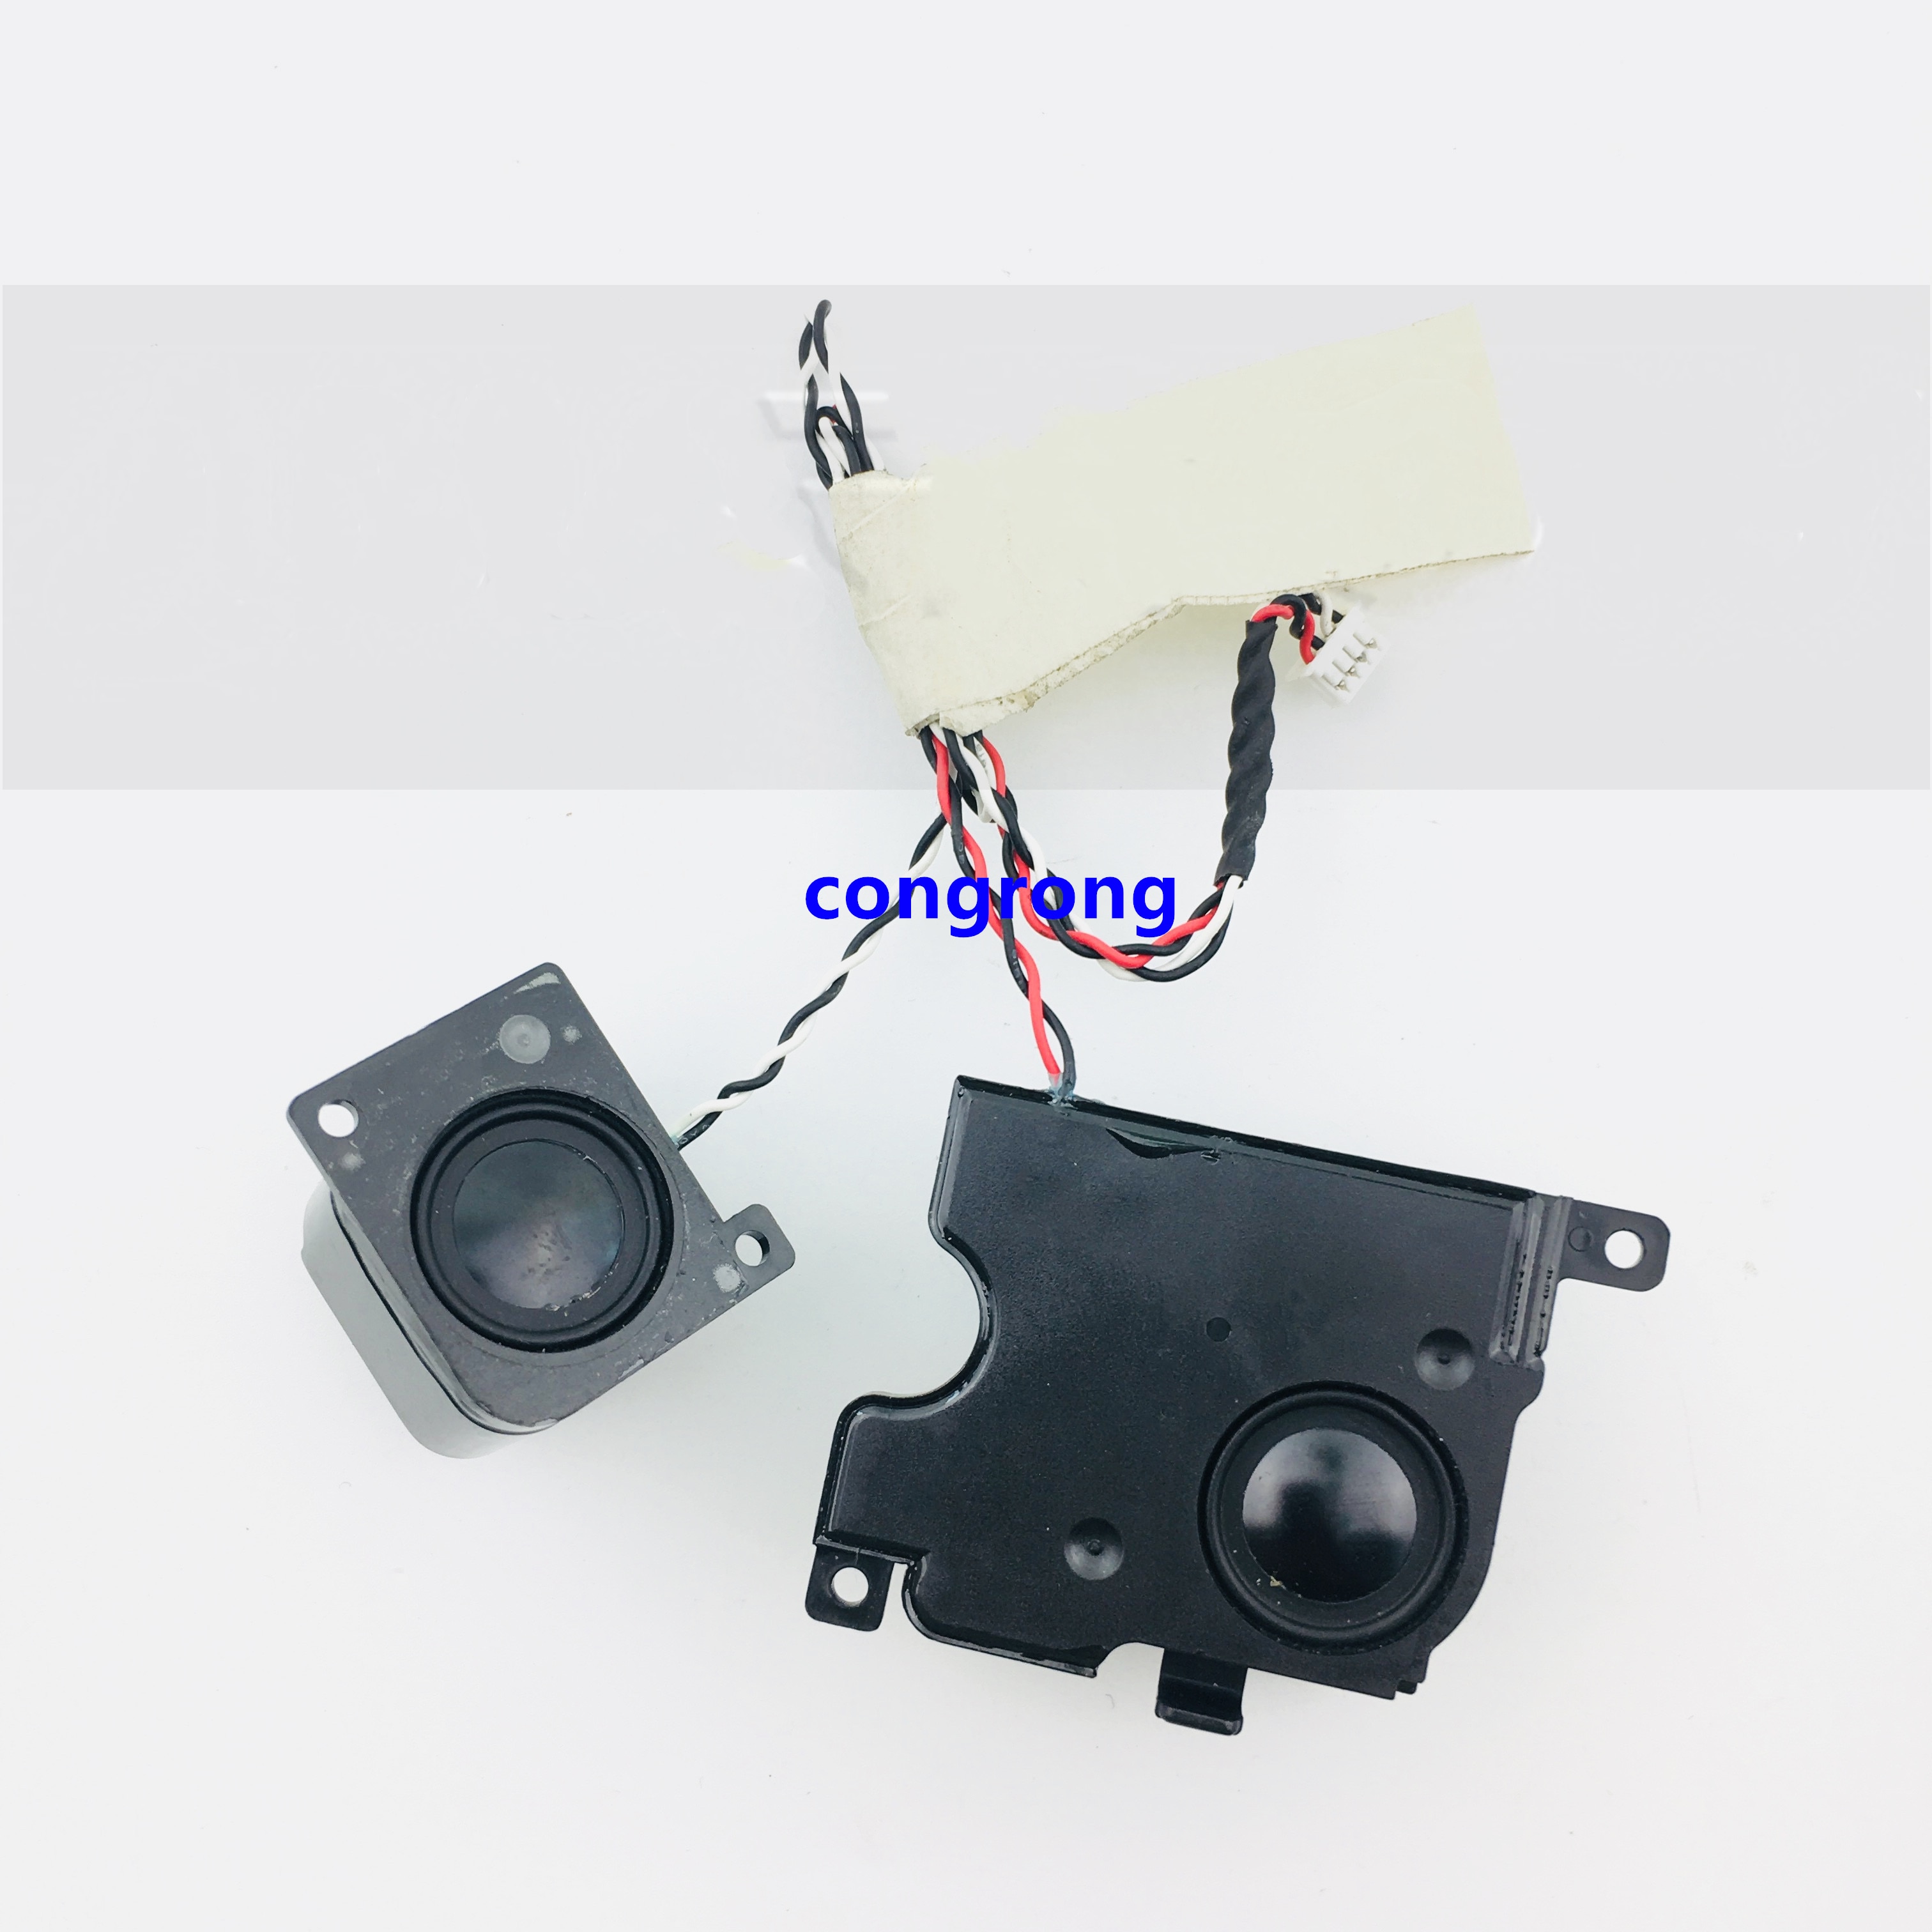 Laptop Internal Speakers for SAMSUNG NP300E5A NP305E5A NP300E5C NP300E5Z NP300E7A NP305E7A built-in speaker L&R